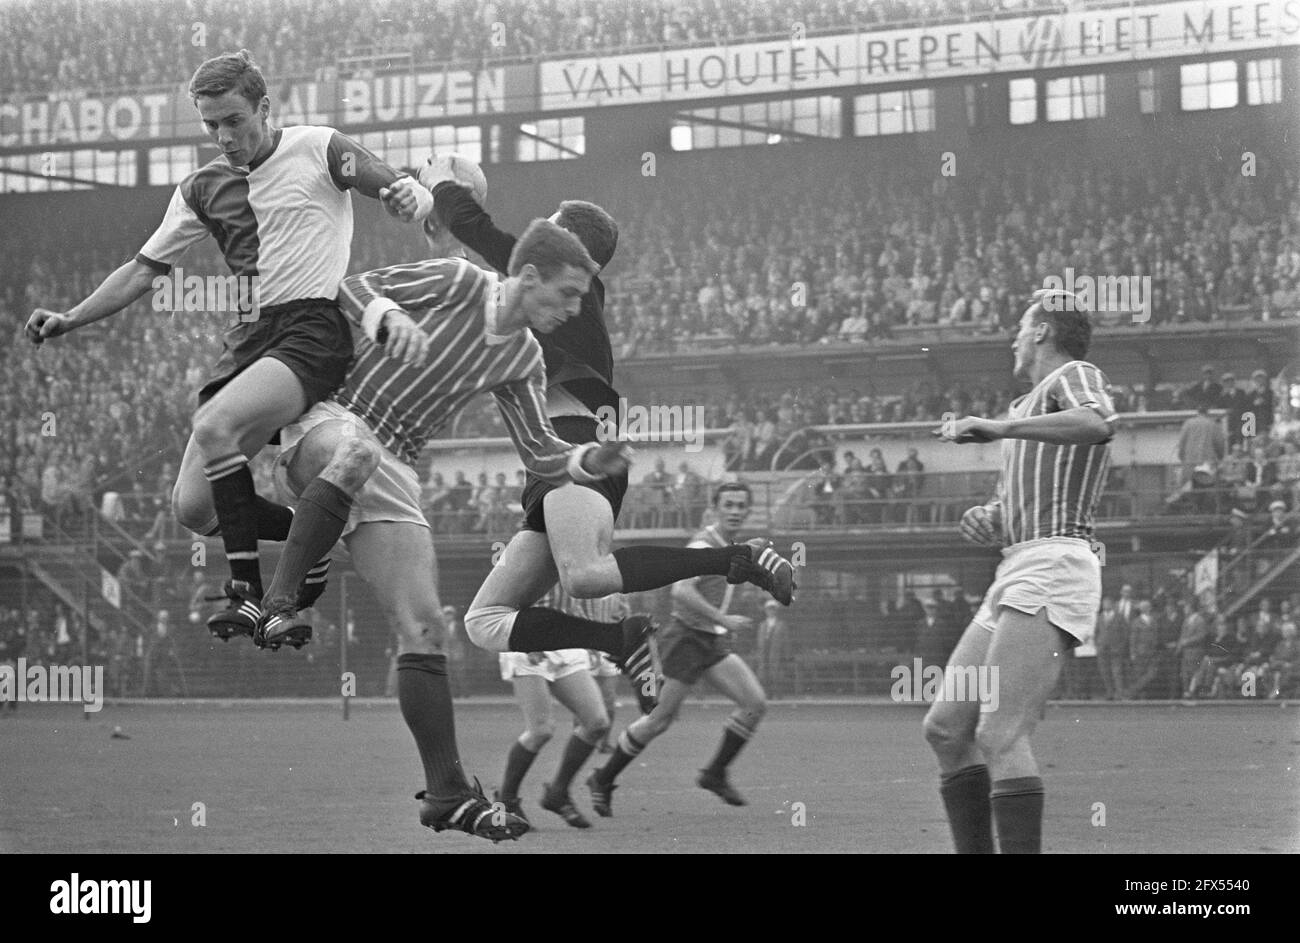 Feyenoord v Fortuna 54 6-0. Goalkeeper Winge in duel with Kindvall, September 17, 1967, duels, sports, soccer, The Netherlands, 20th century press agency photo, news to remember, documentary, historic photography 1945-1990, visual stories, human history of the Twentieth Century, capturing moments in time Stock Photo